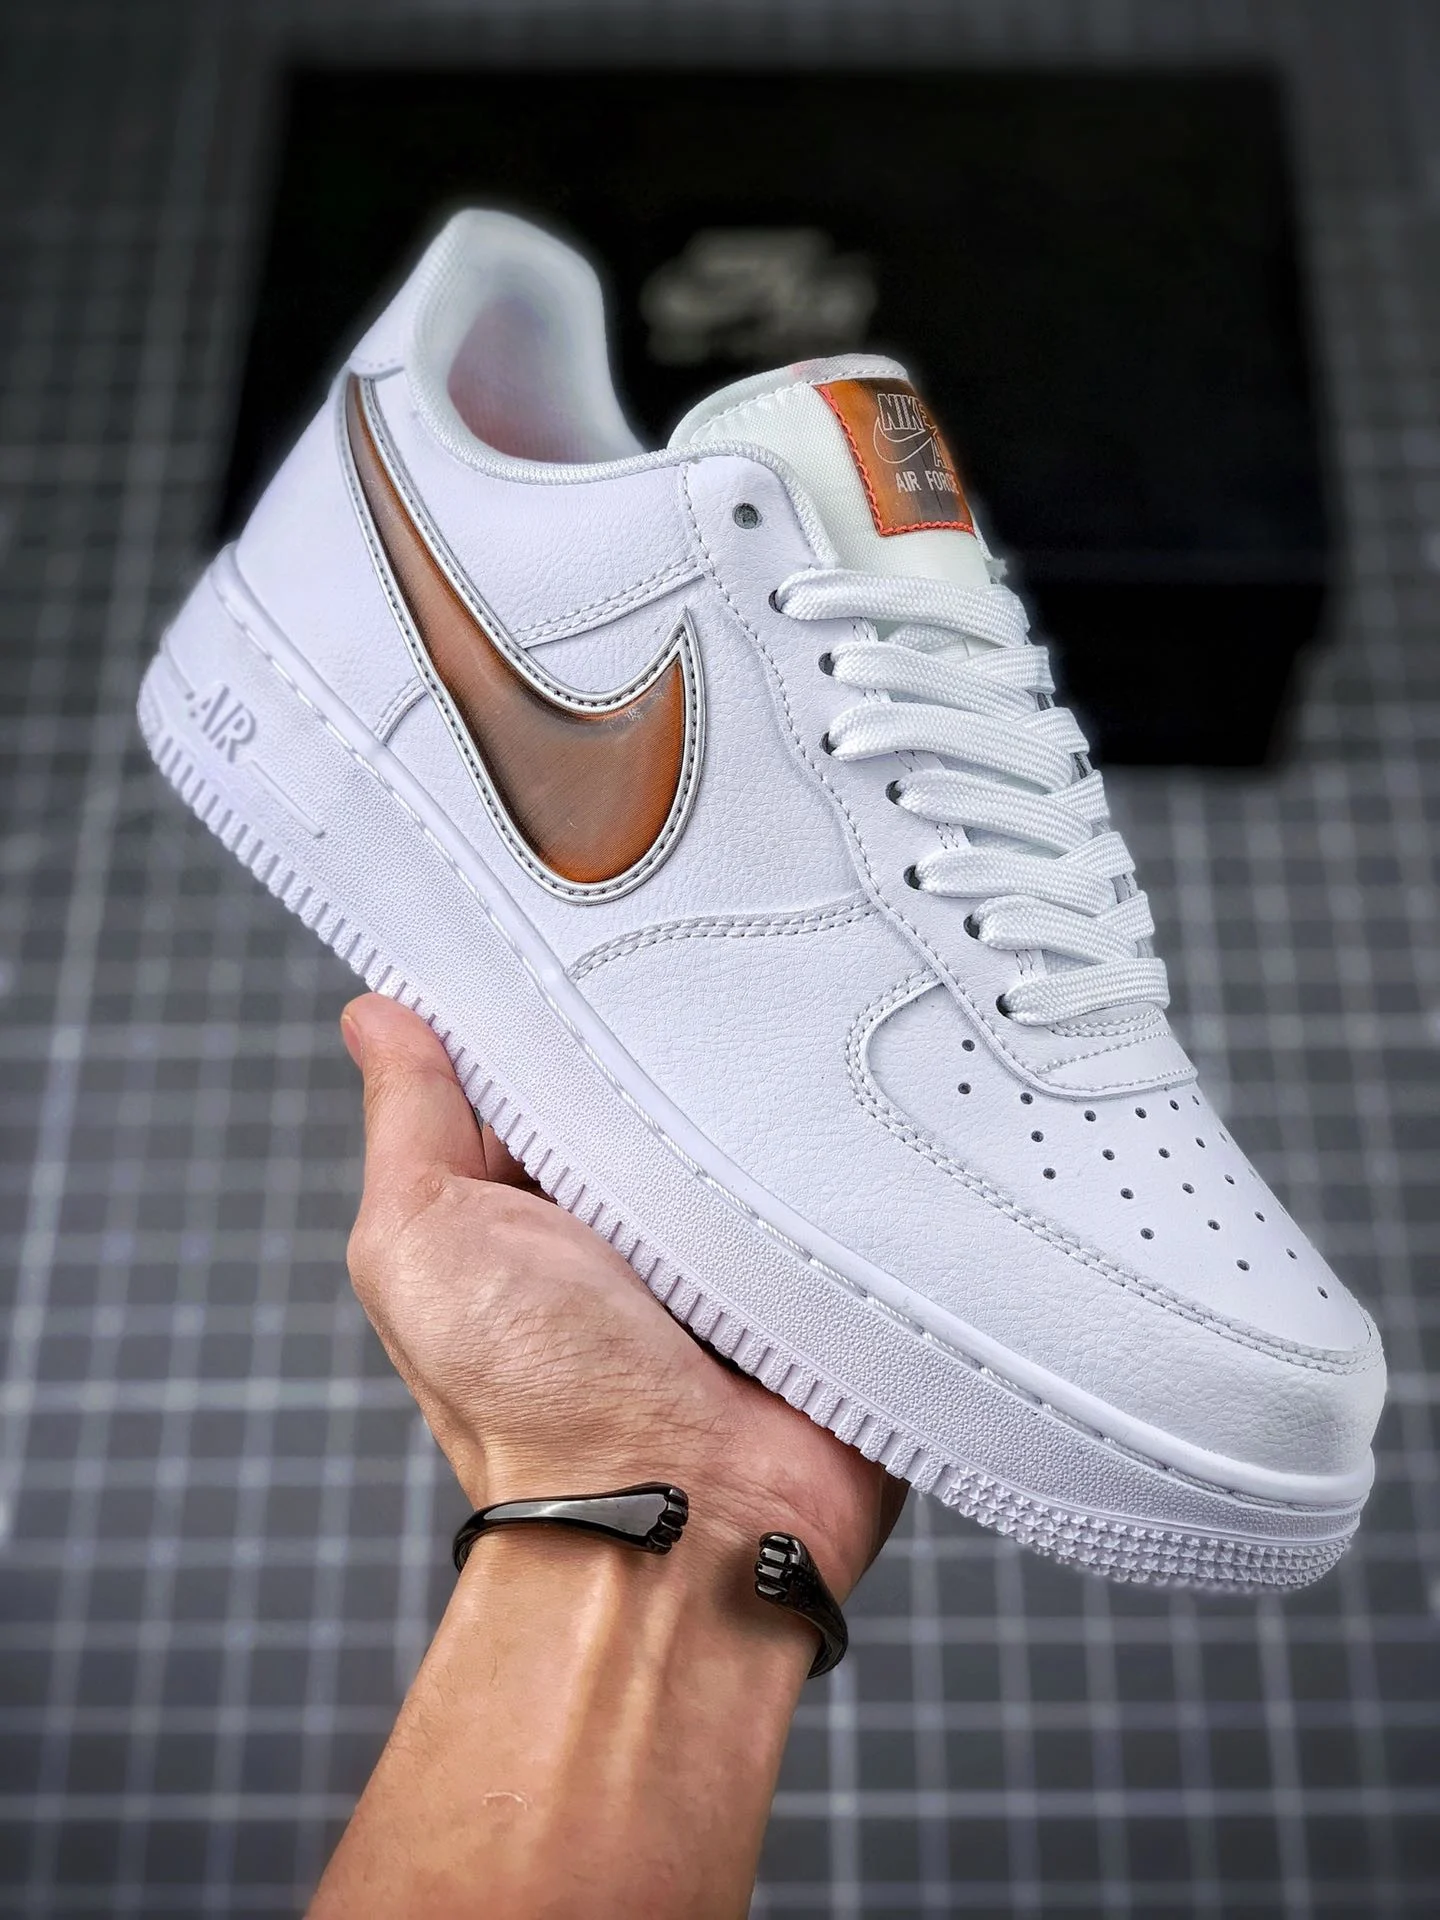 Nike Air Force 1 07 LV8 3 White Court Purple-Infrared 23 For Sale